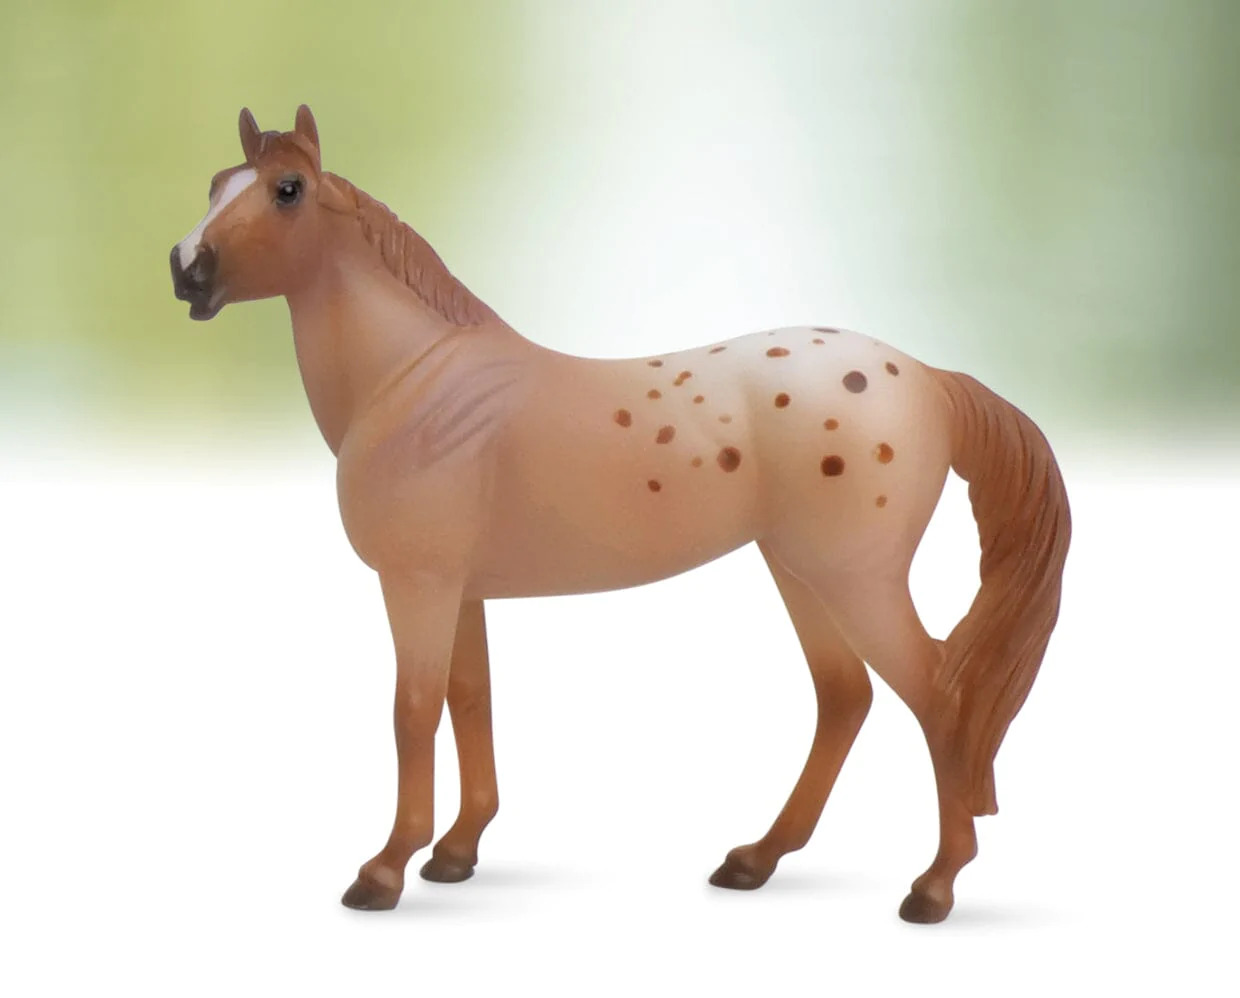 Breyer #6952 /#6958 Assorted Stablemates Horse Collection Series 2 Stablemate Red Roan Blanket Appaloosa Standing Stock Horse